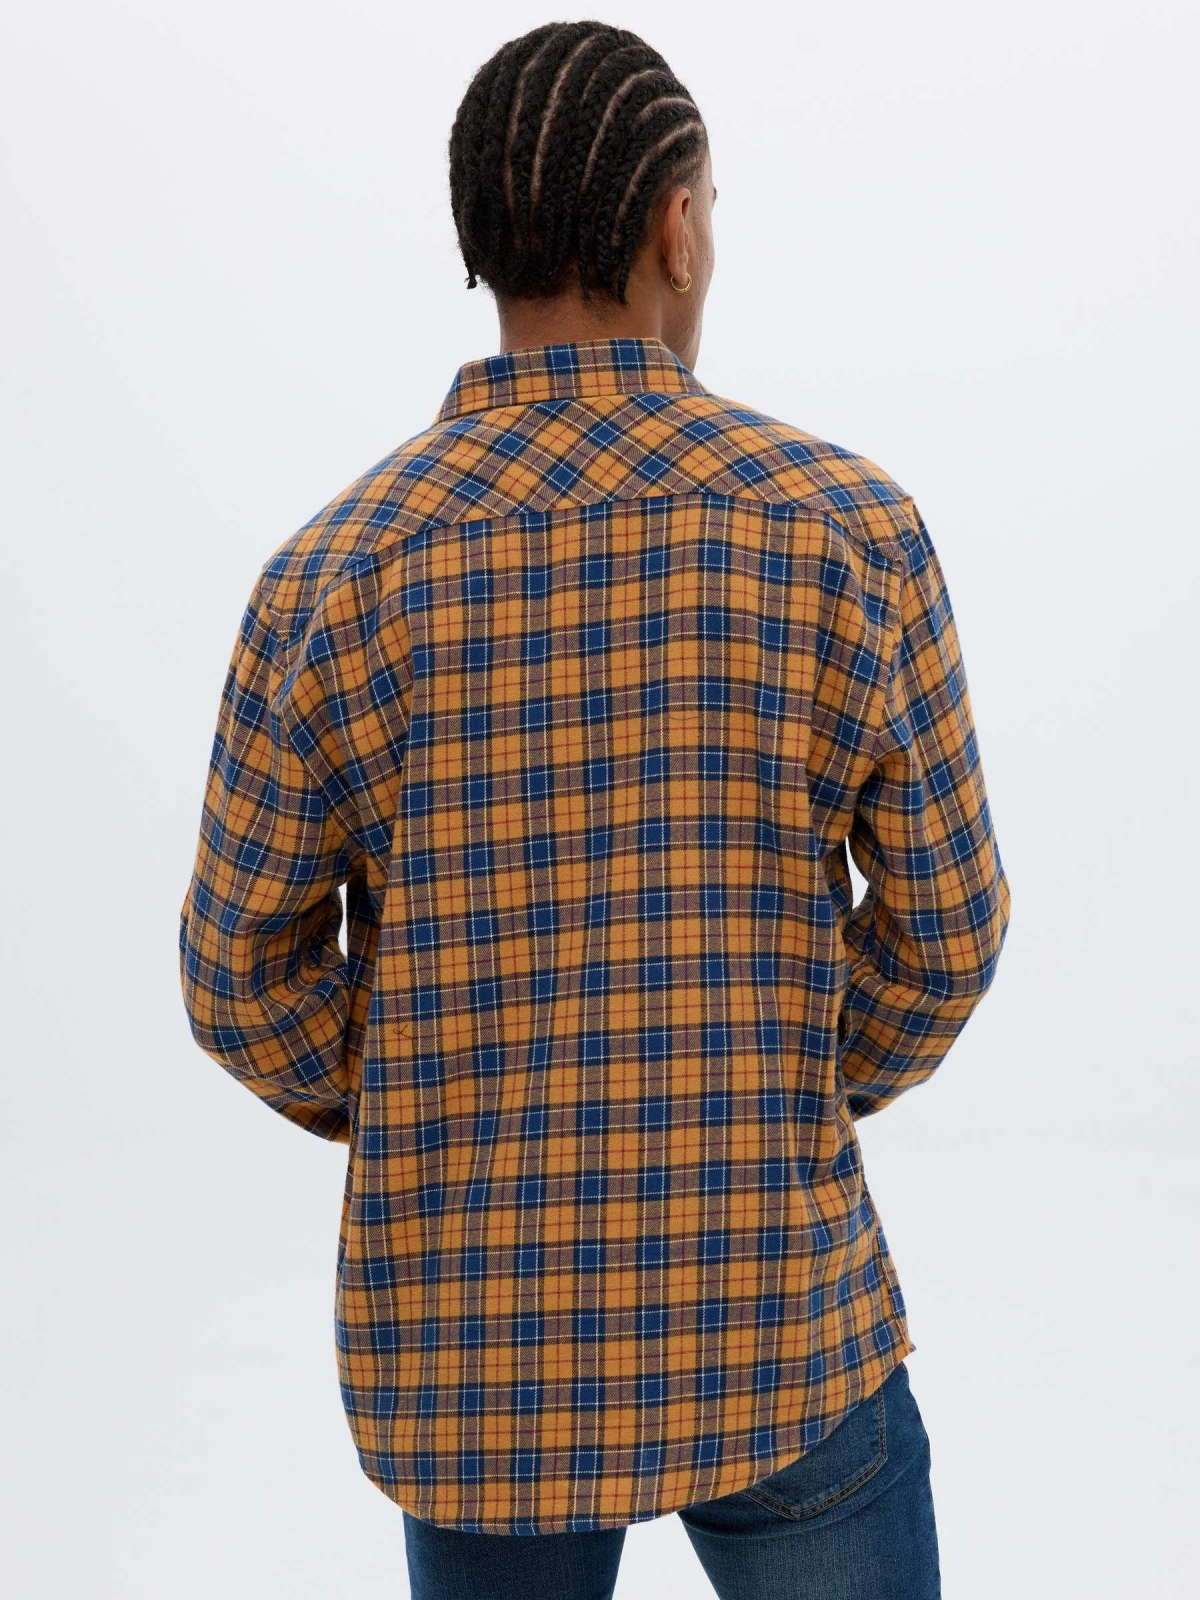 Plaid flannel shirt ochre middle back view